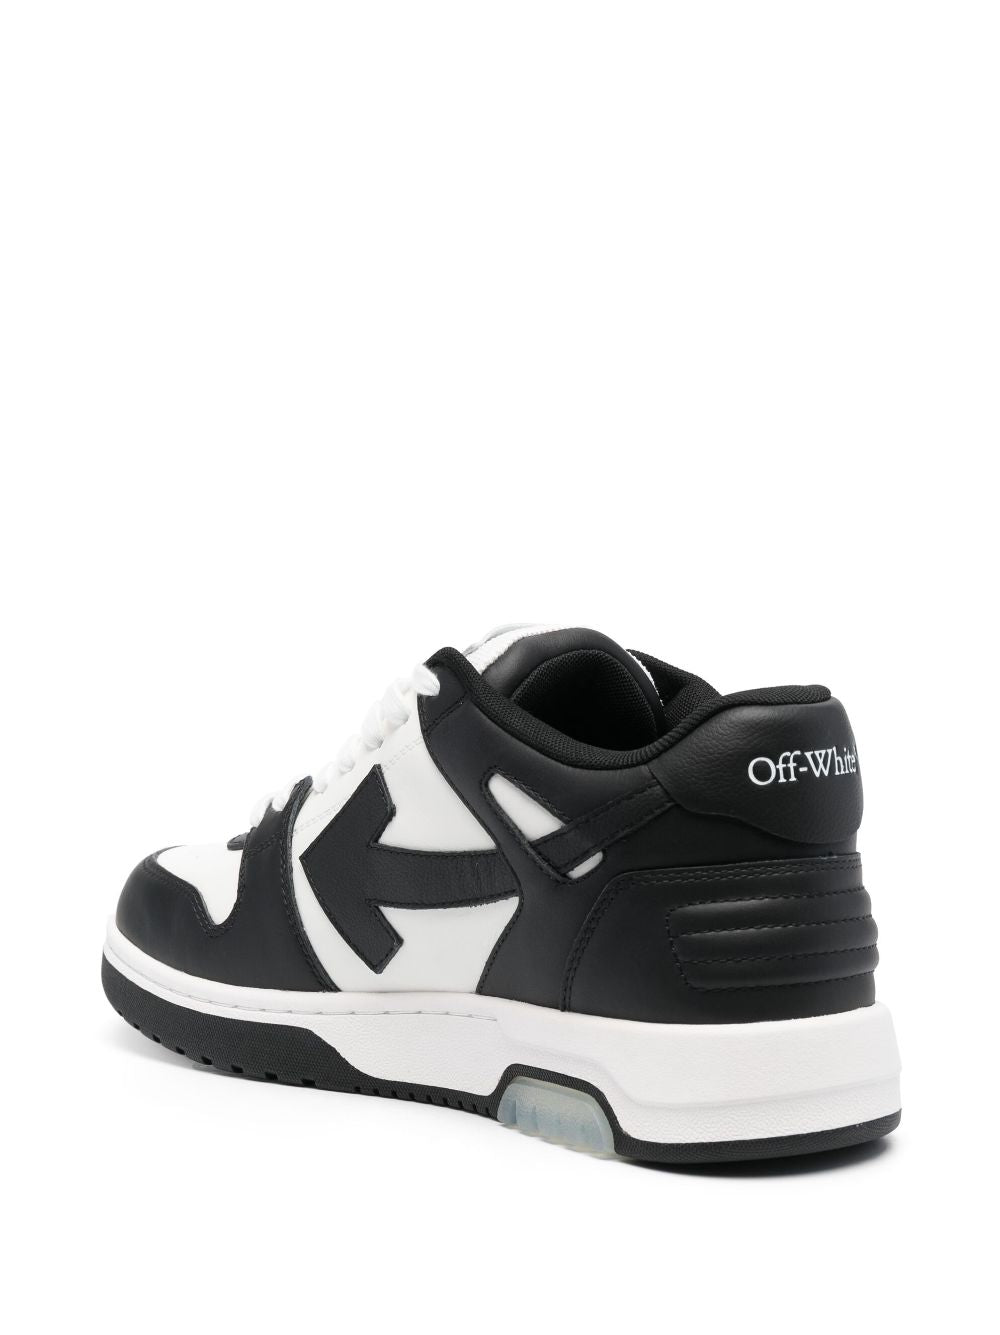 OFF-WHITE OUT OF OFFICE 100% Leather LEATHER